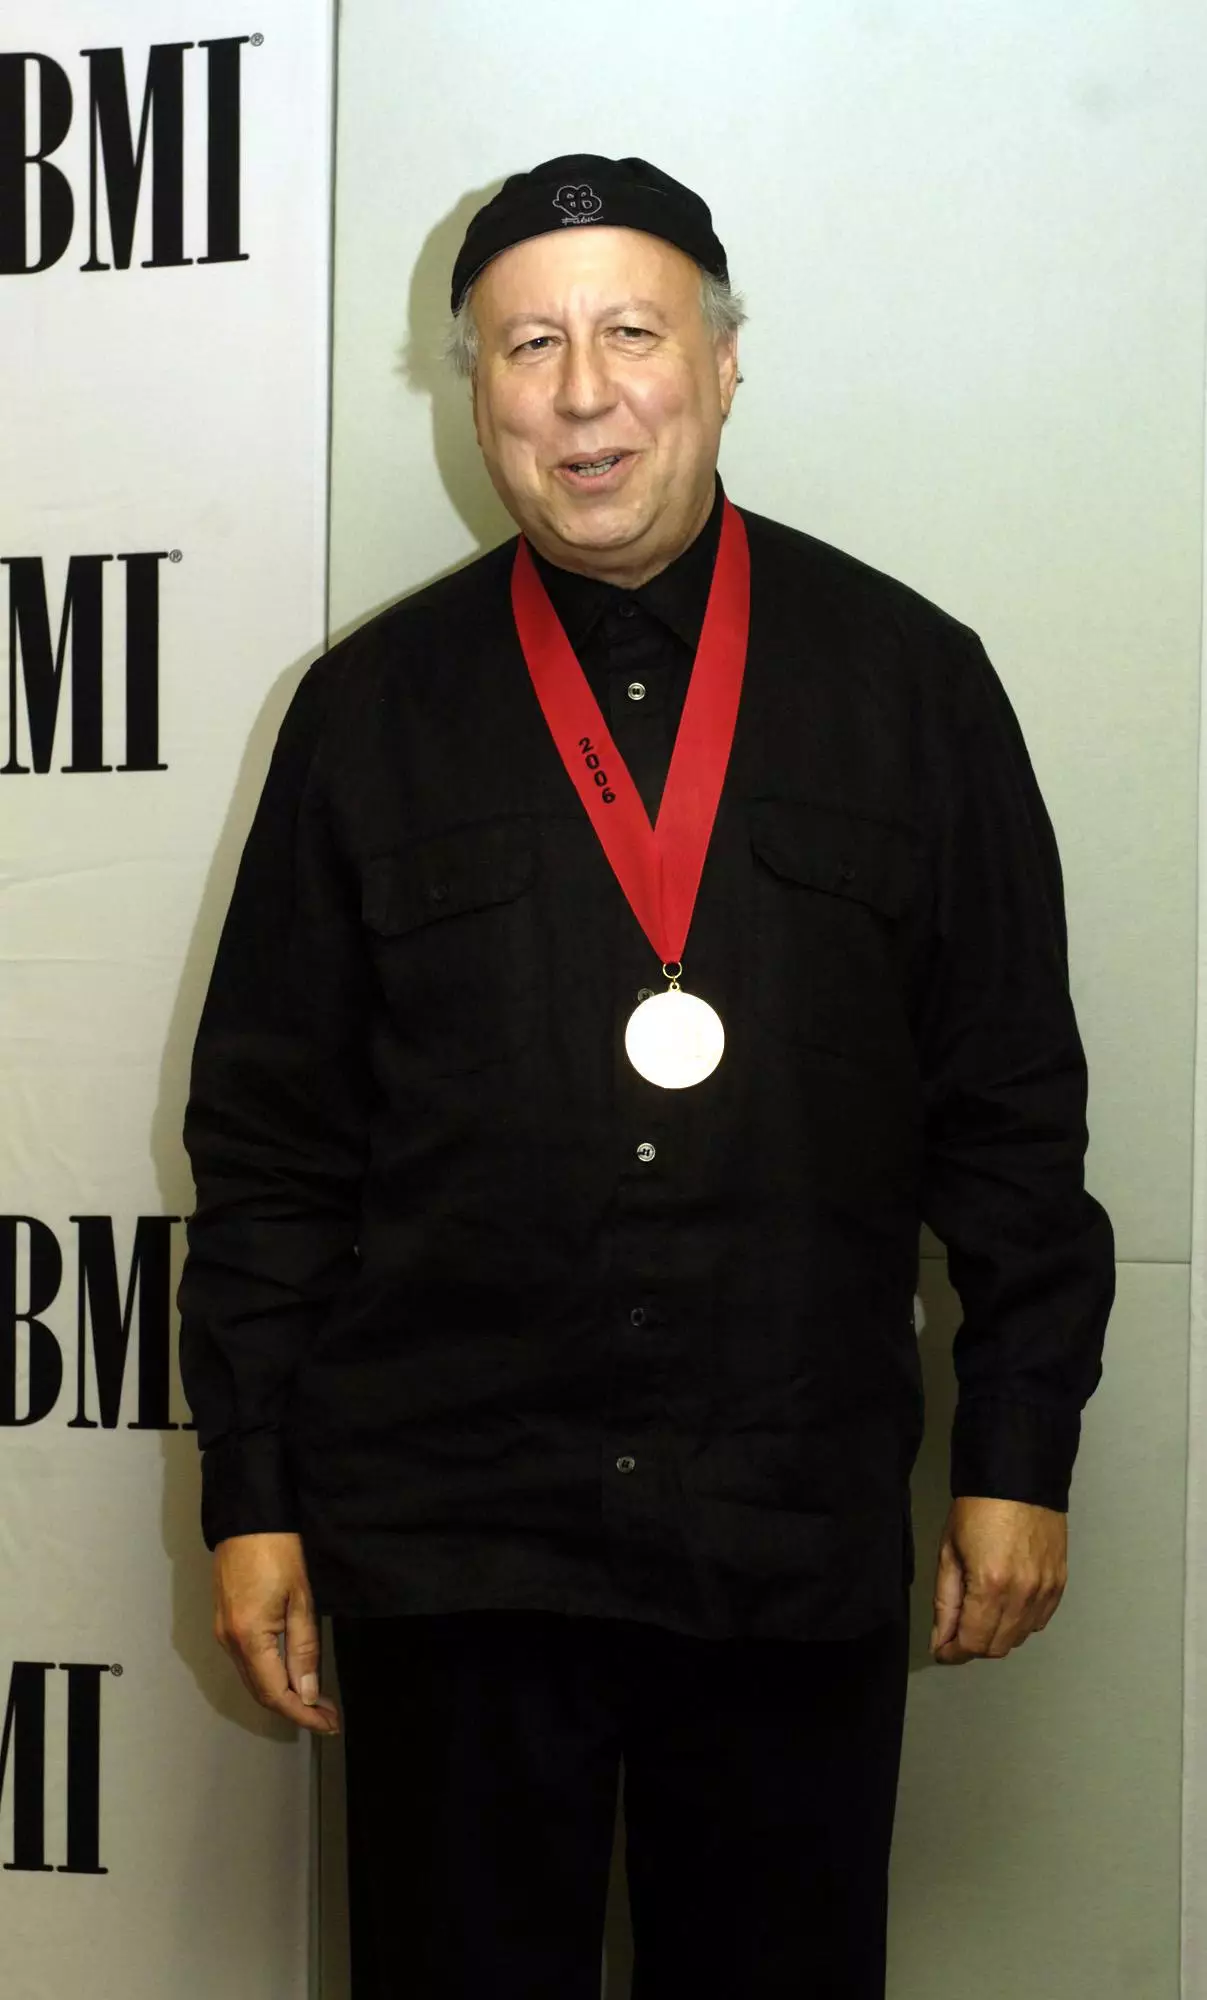 Musician and songwriter Peter Green at the BMI's annual London Awards dinner in 2006.